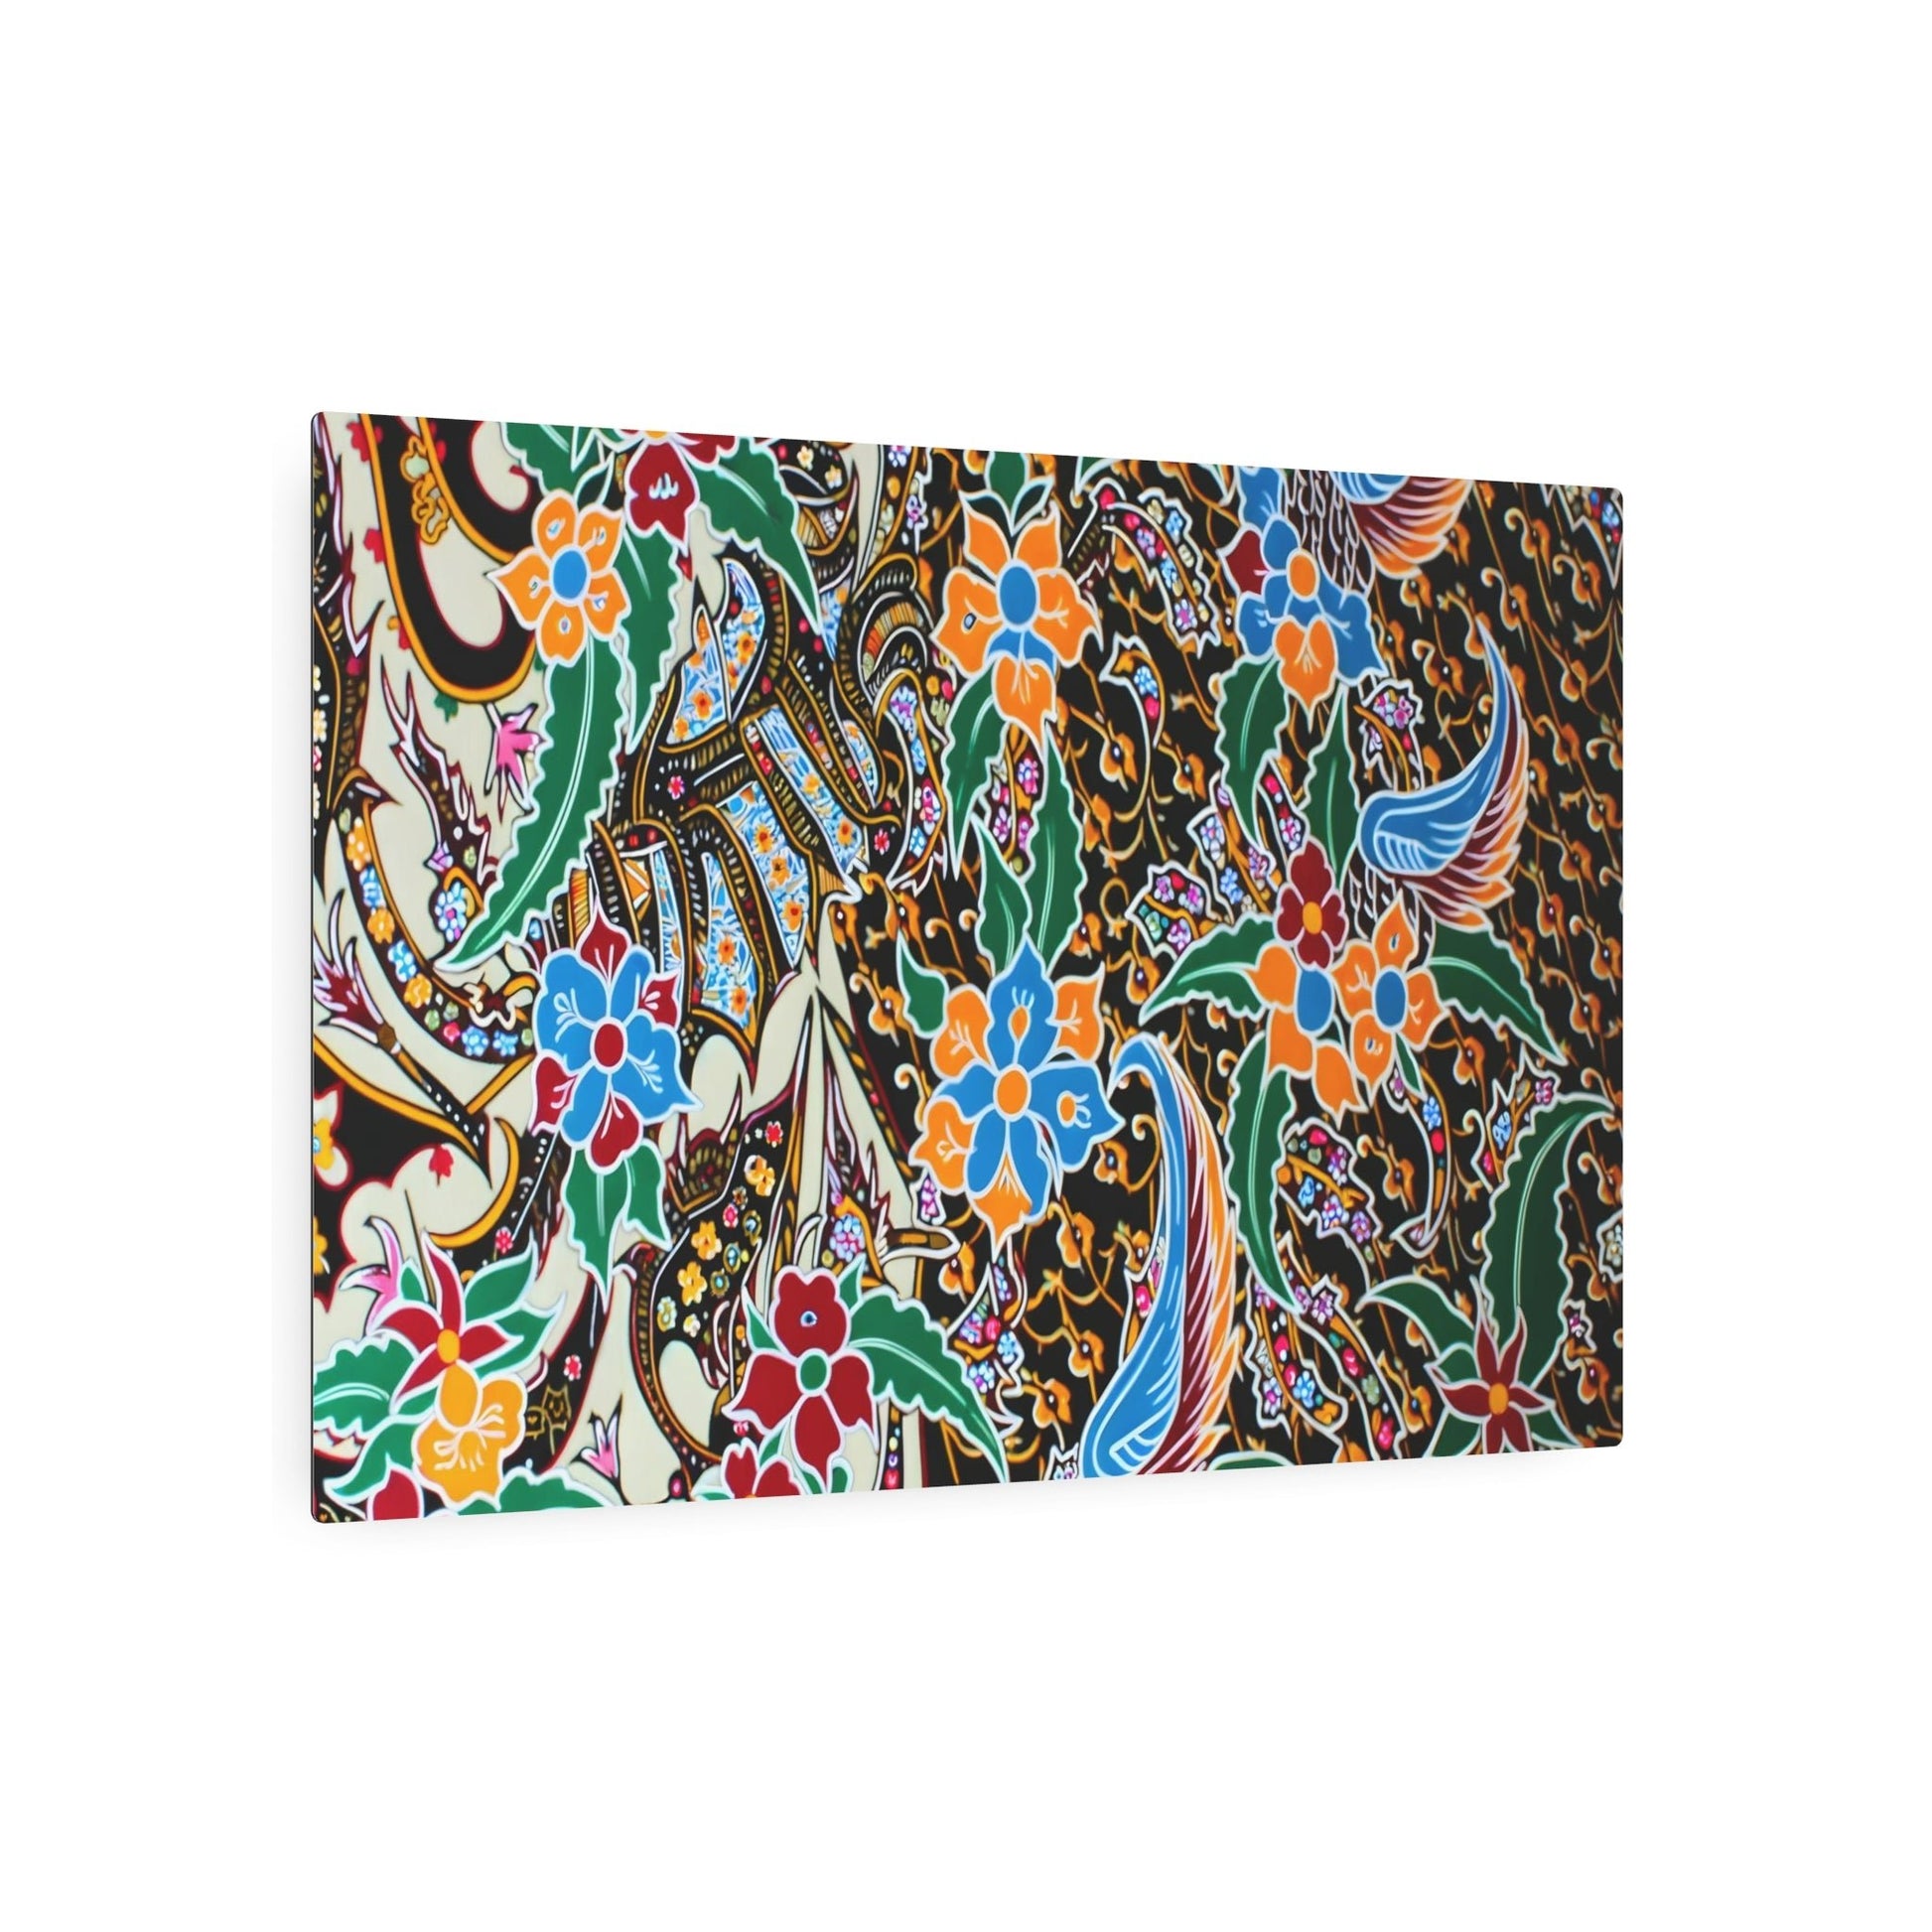 Metal Poster Art | "Vibrant Indonesian Batik Art with Intricate Patterns - Traditional Floral, Bird and Geometric Design in Non-Western & Global Styles Category" - Metal Poster Art 36″ x 24″ (Horizontal) 0.12''